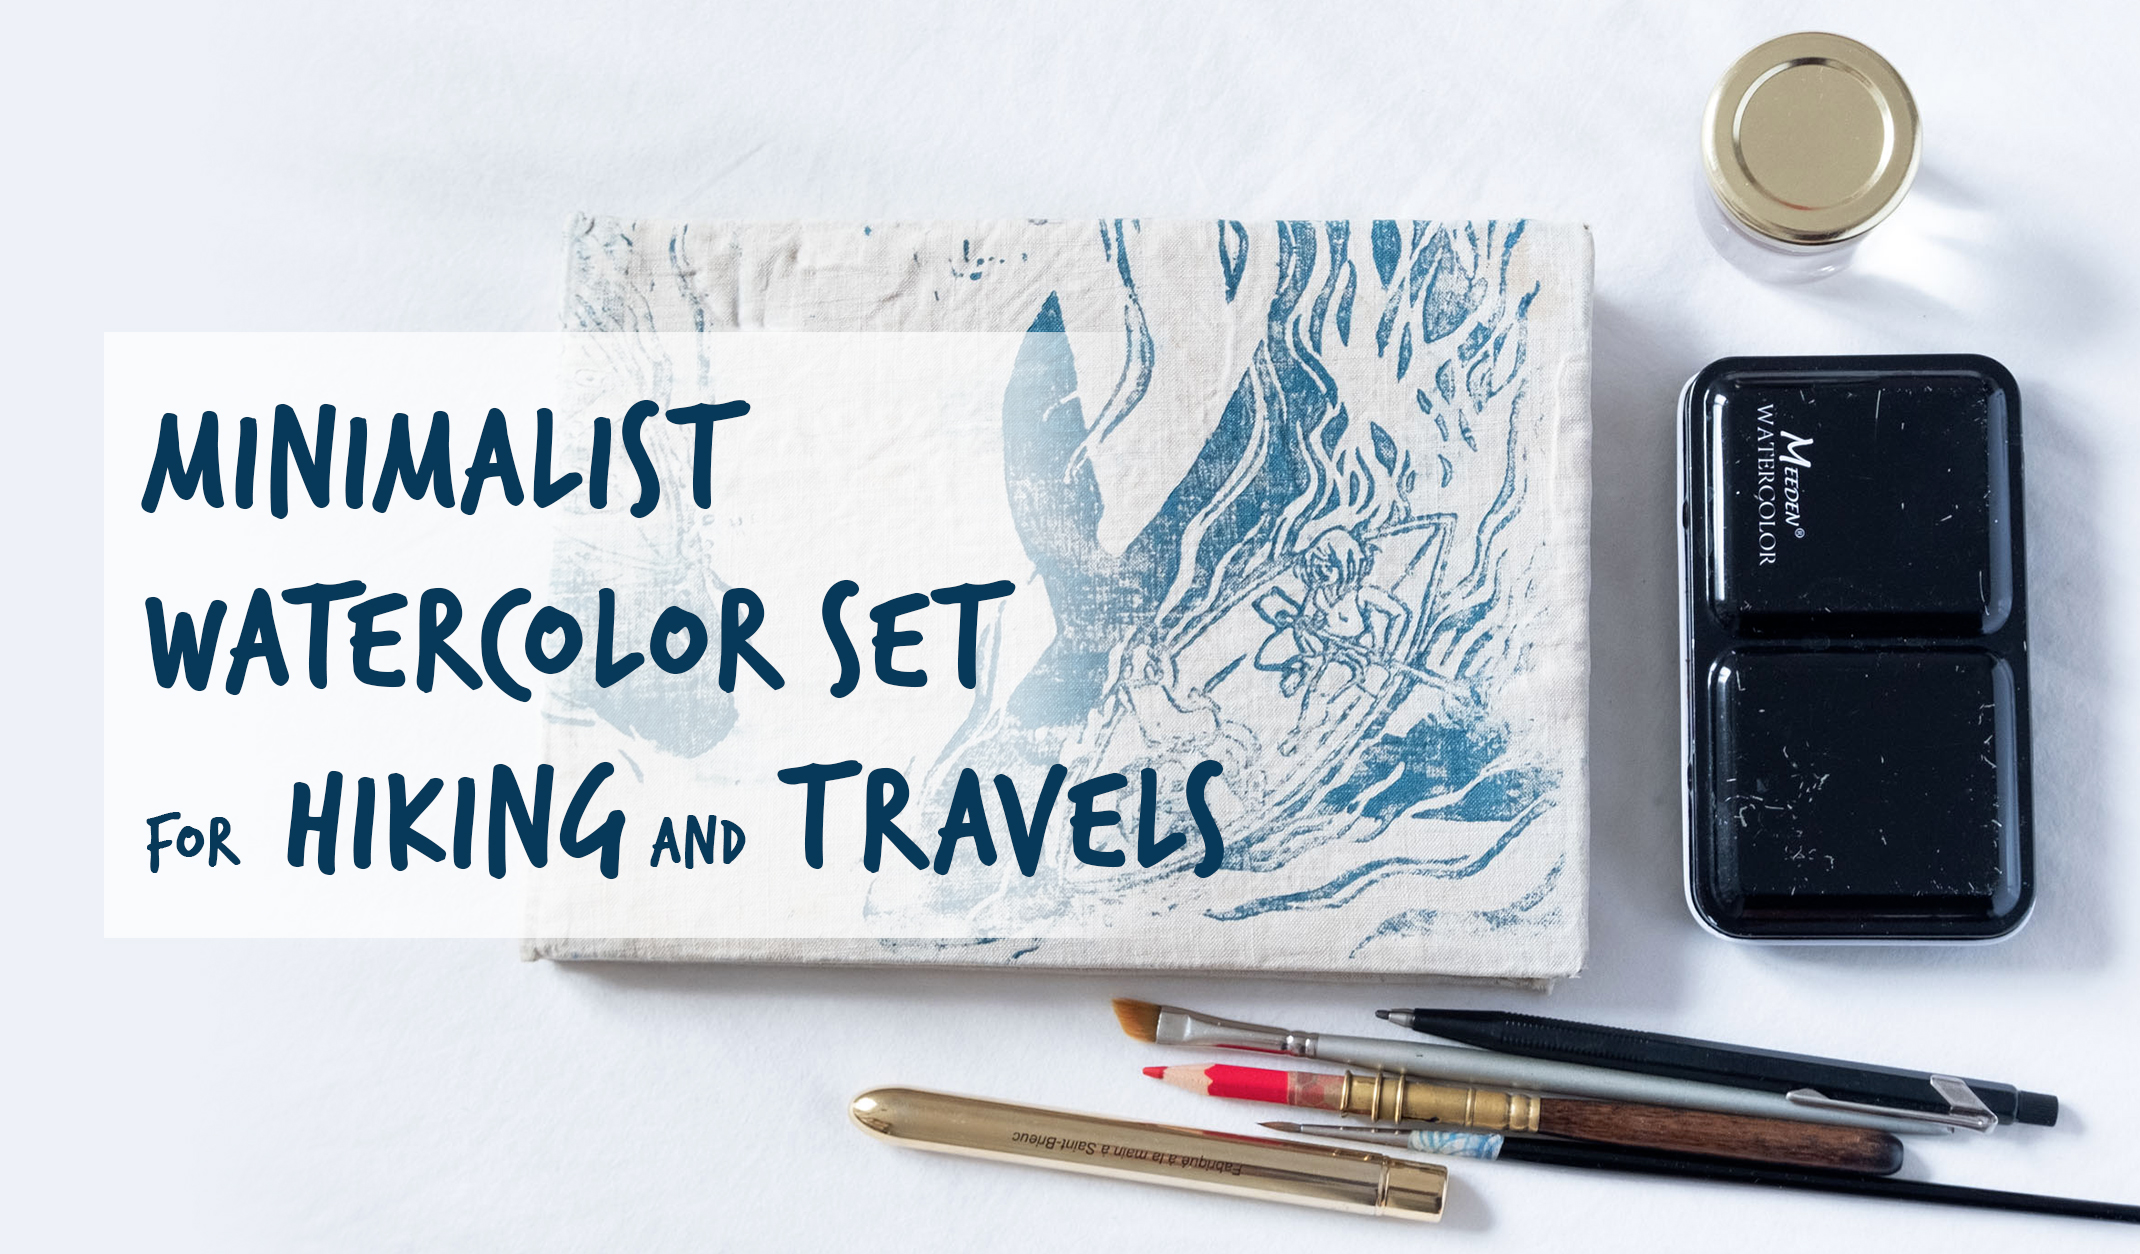 Minimalist watercolor set for hiking and travels